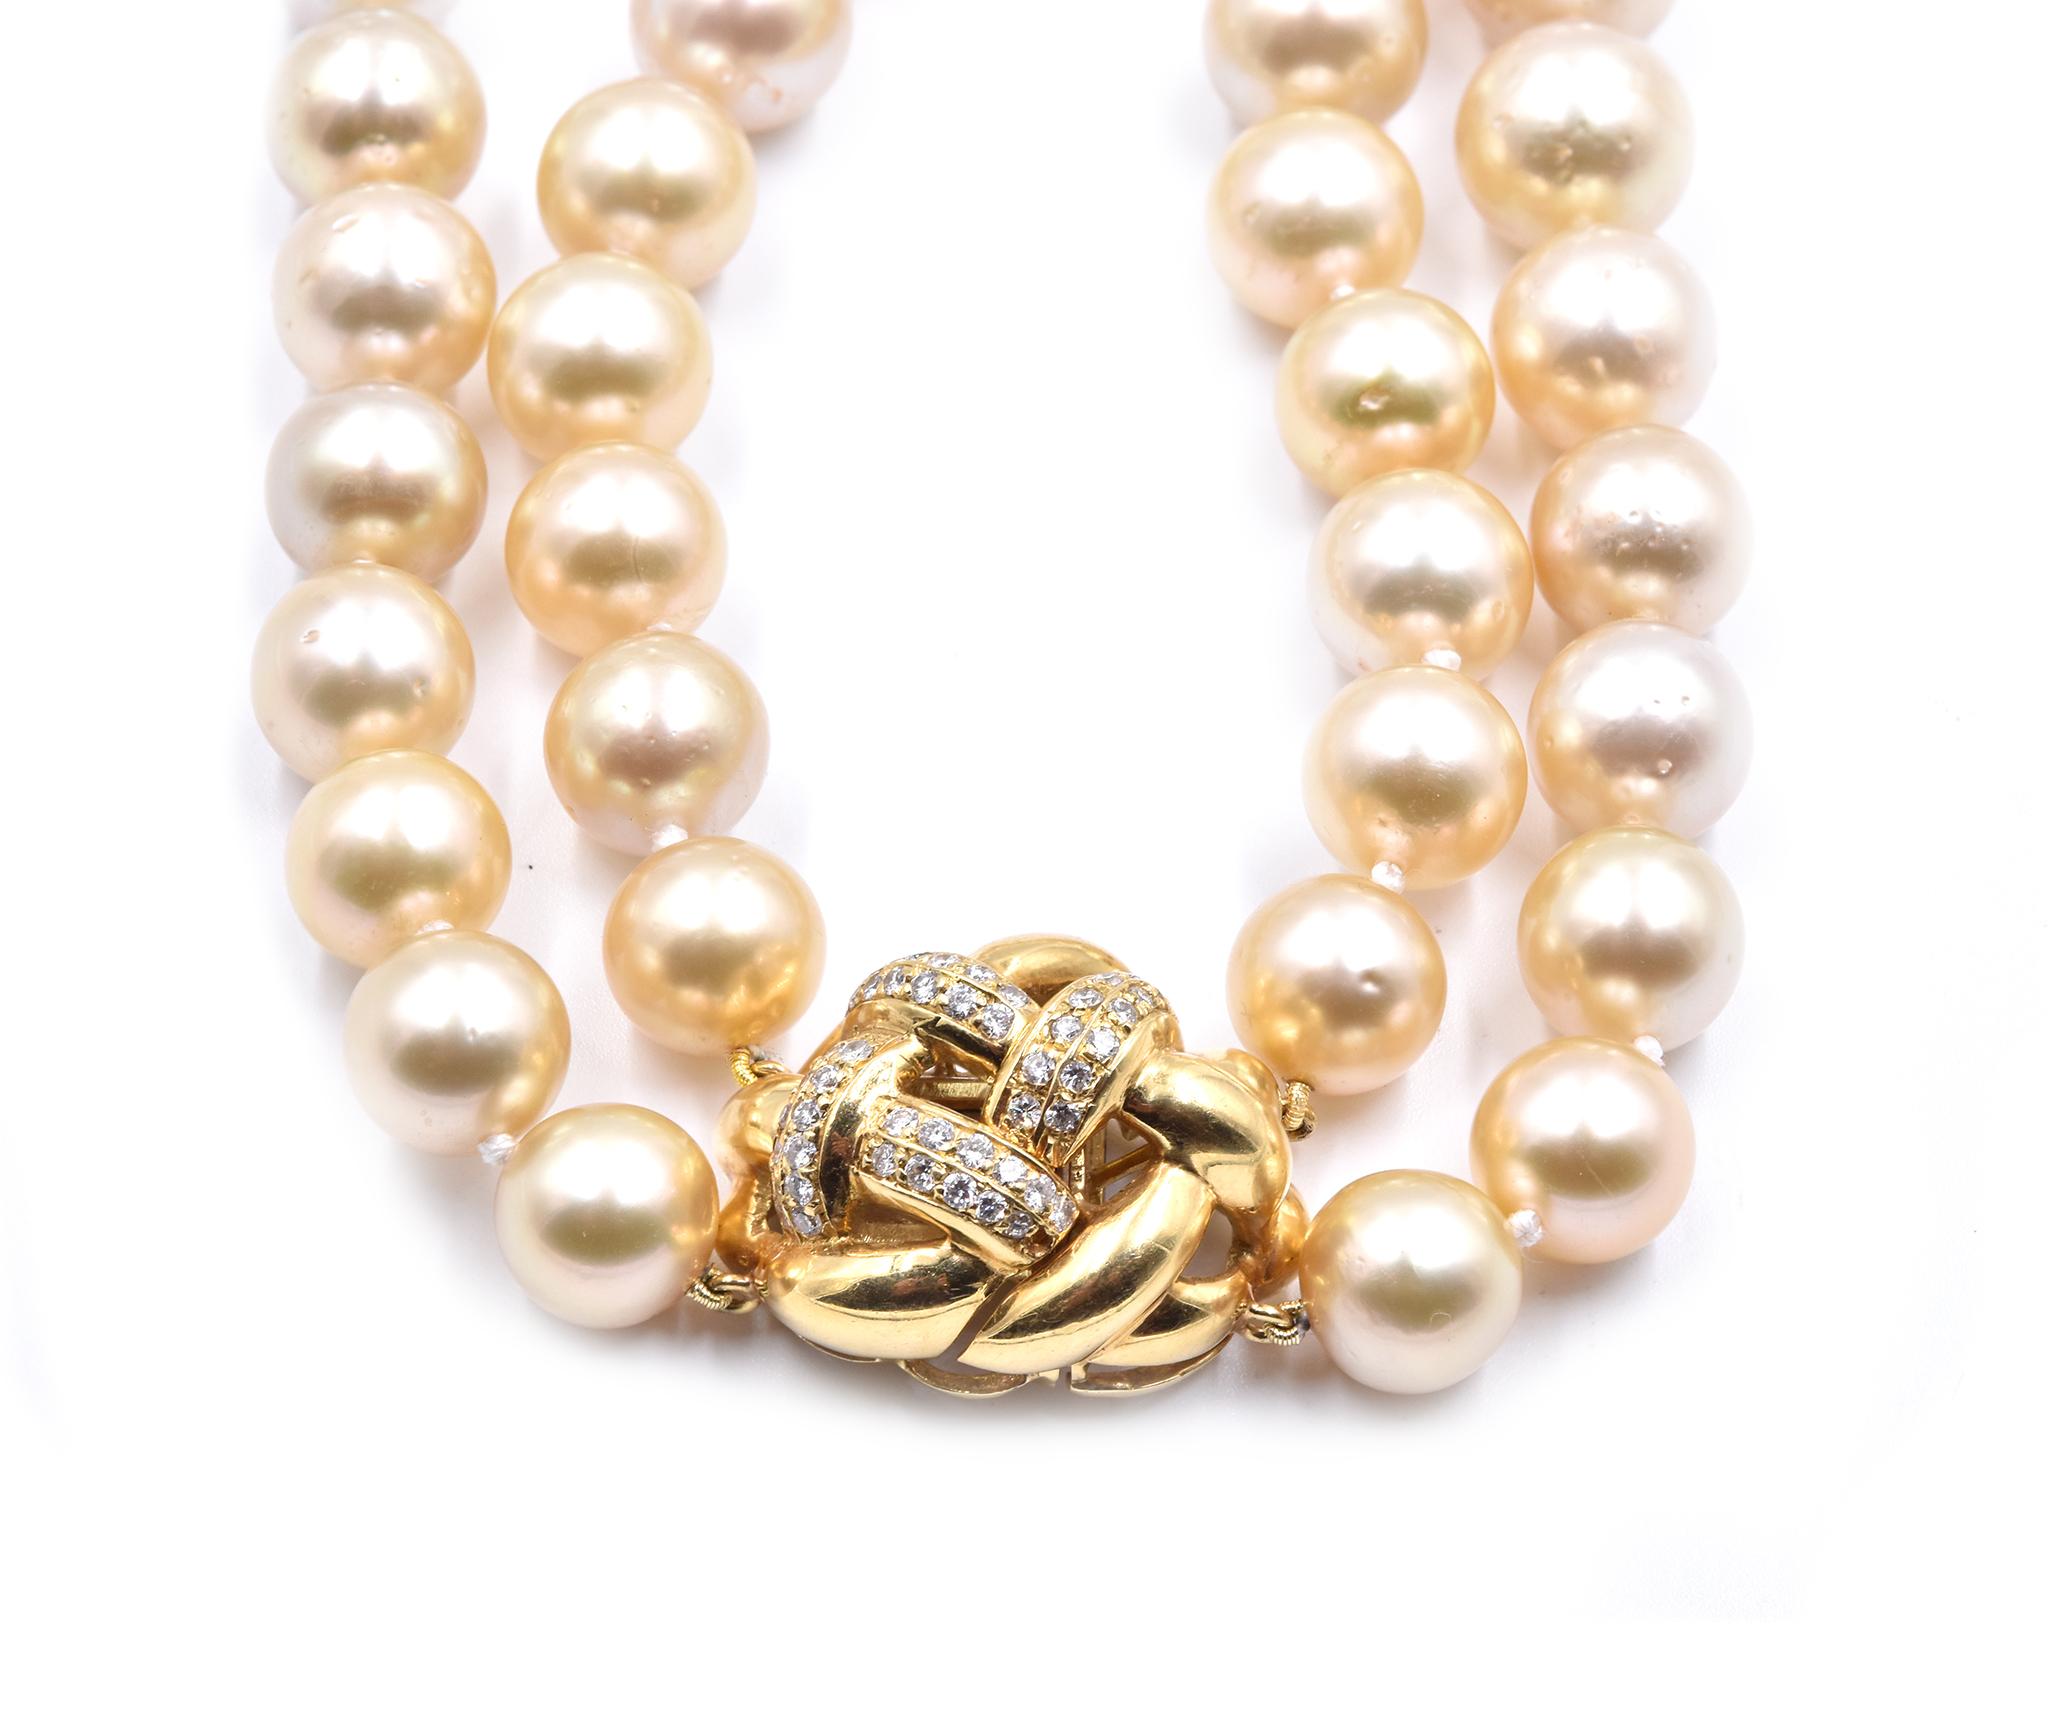 Designer: Custom
Material: 18K yellow gold
Pearl: 10.5-14MM Golden South Sea
Dimensions: necklace measures 20-22 inches in length
Weight: 198.62 grams
